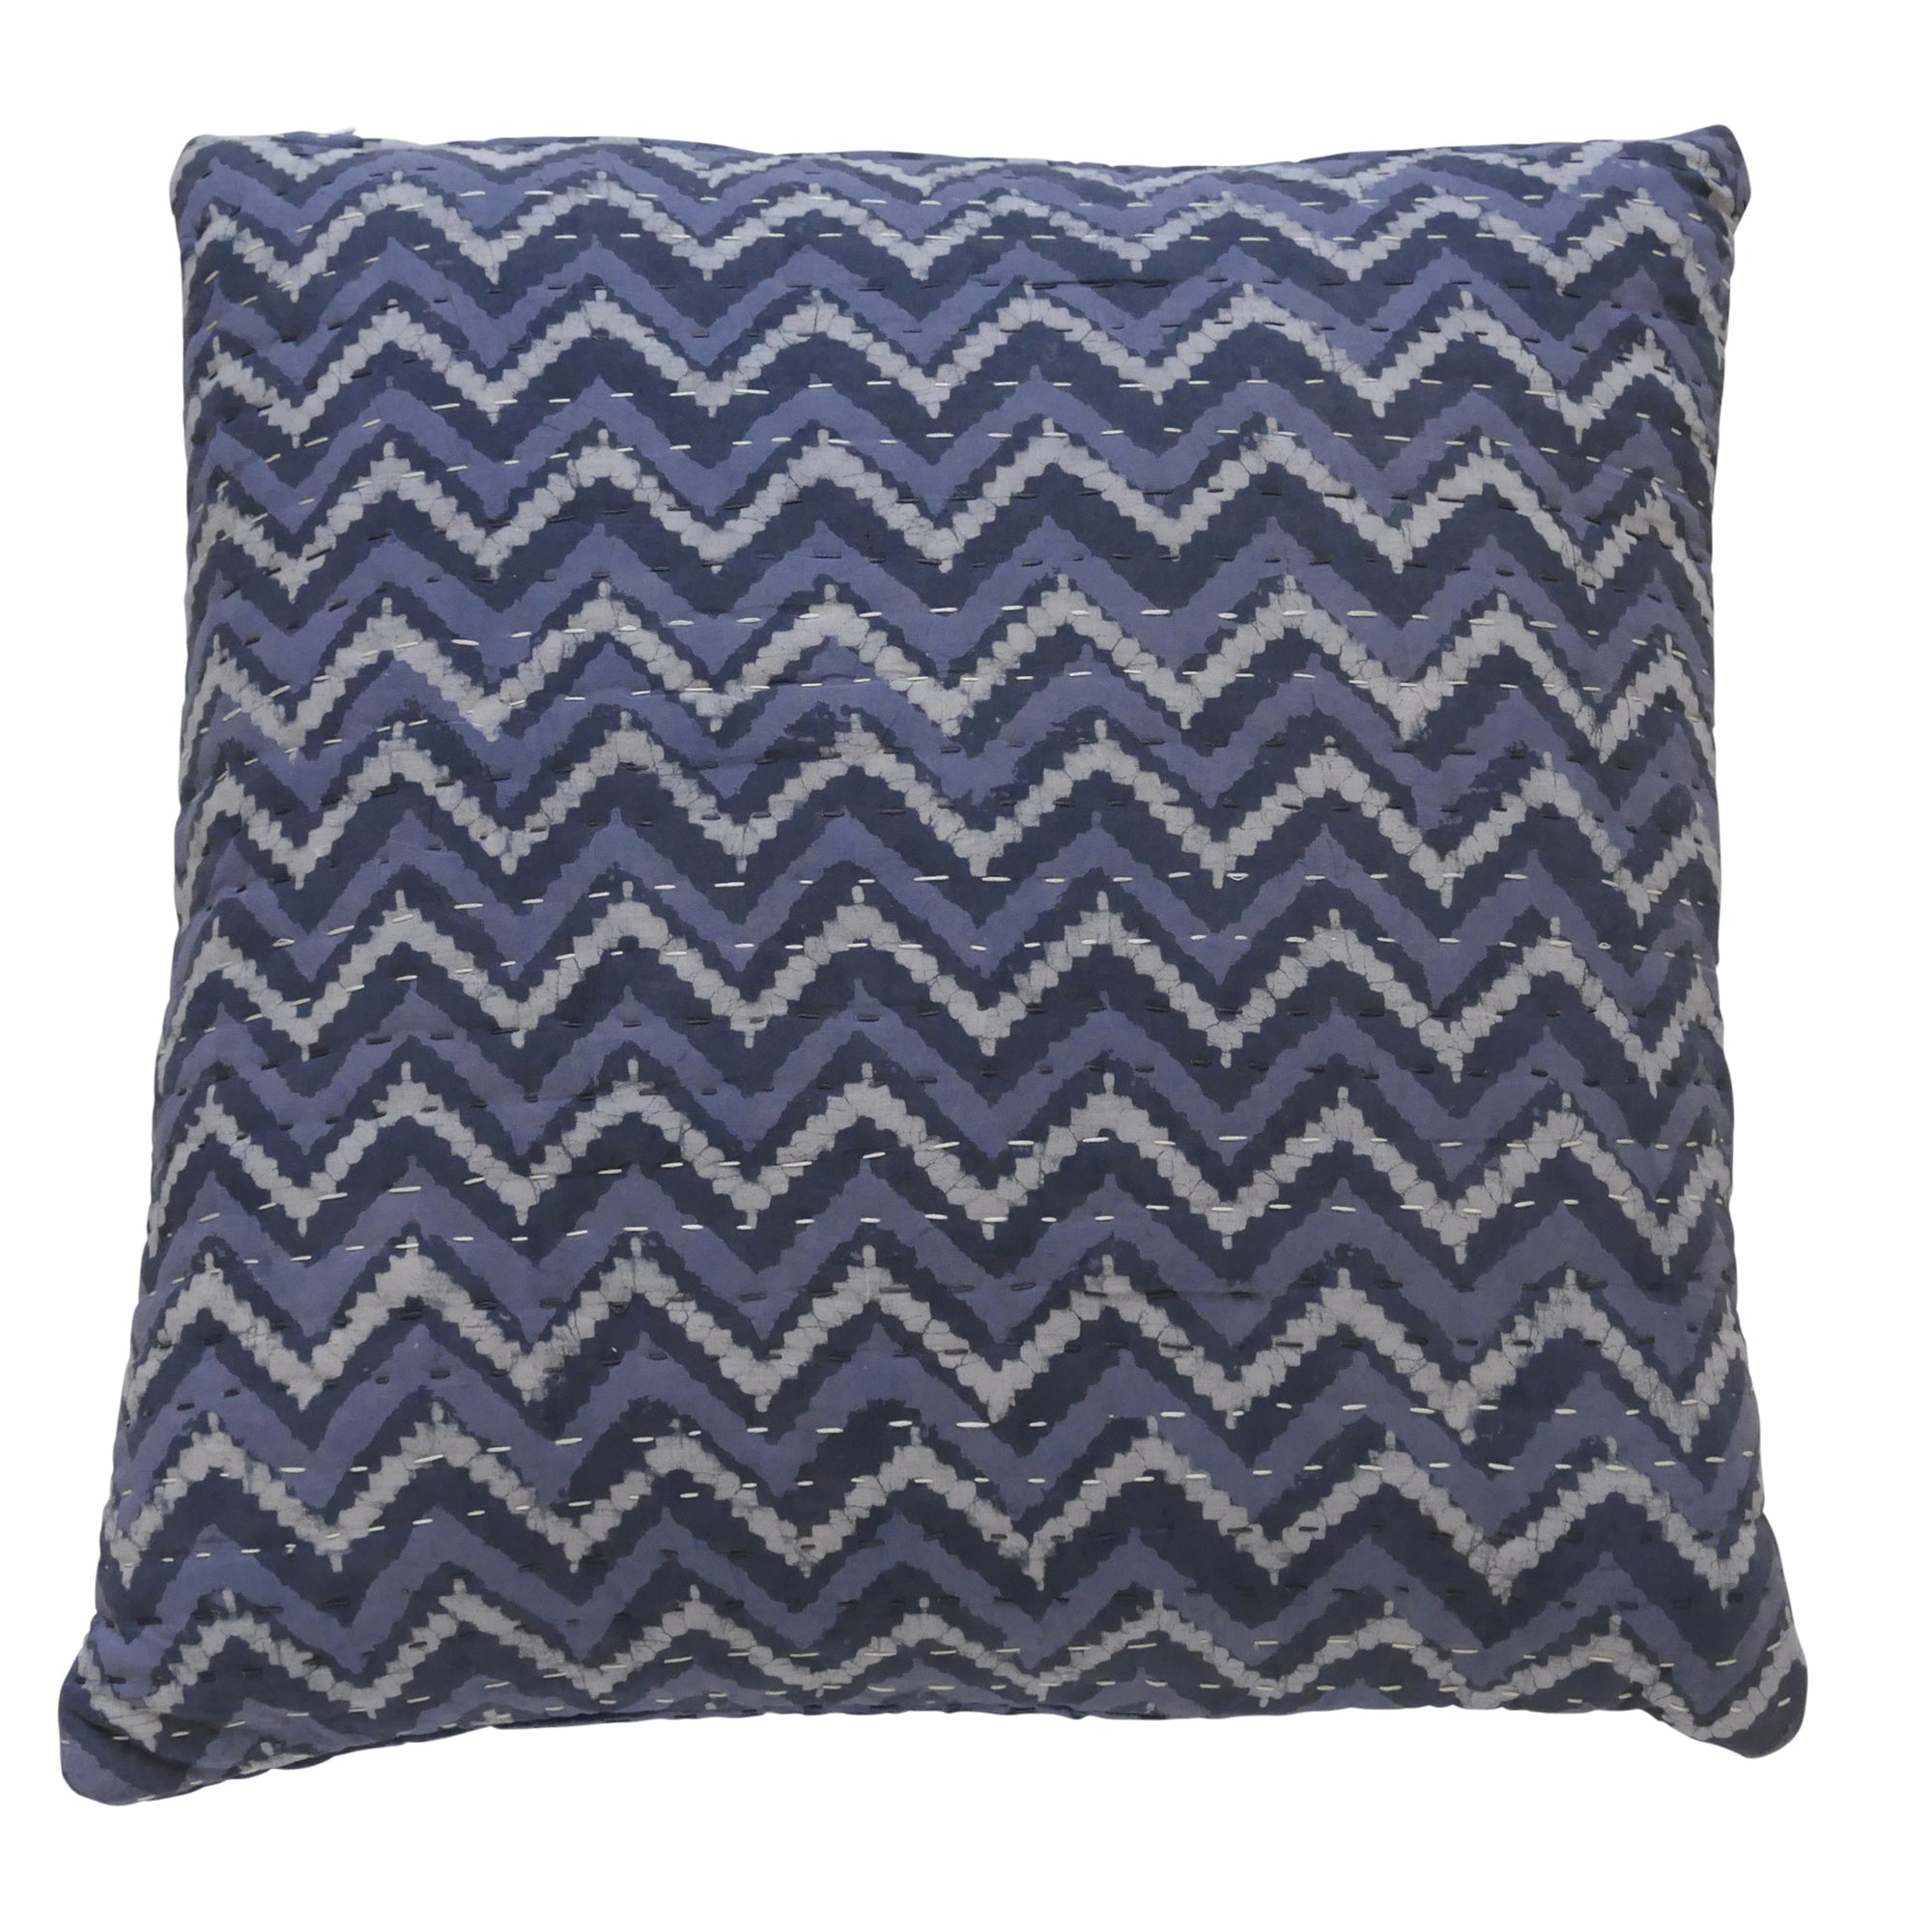 Stormy Weather cushion